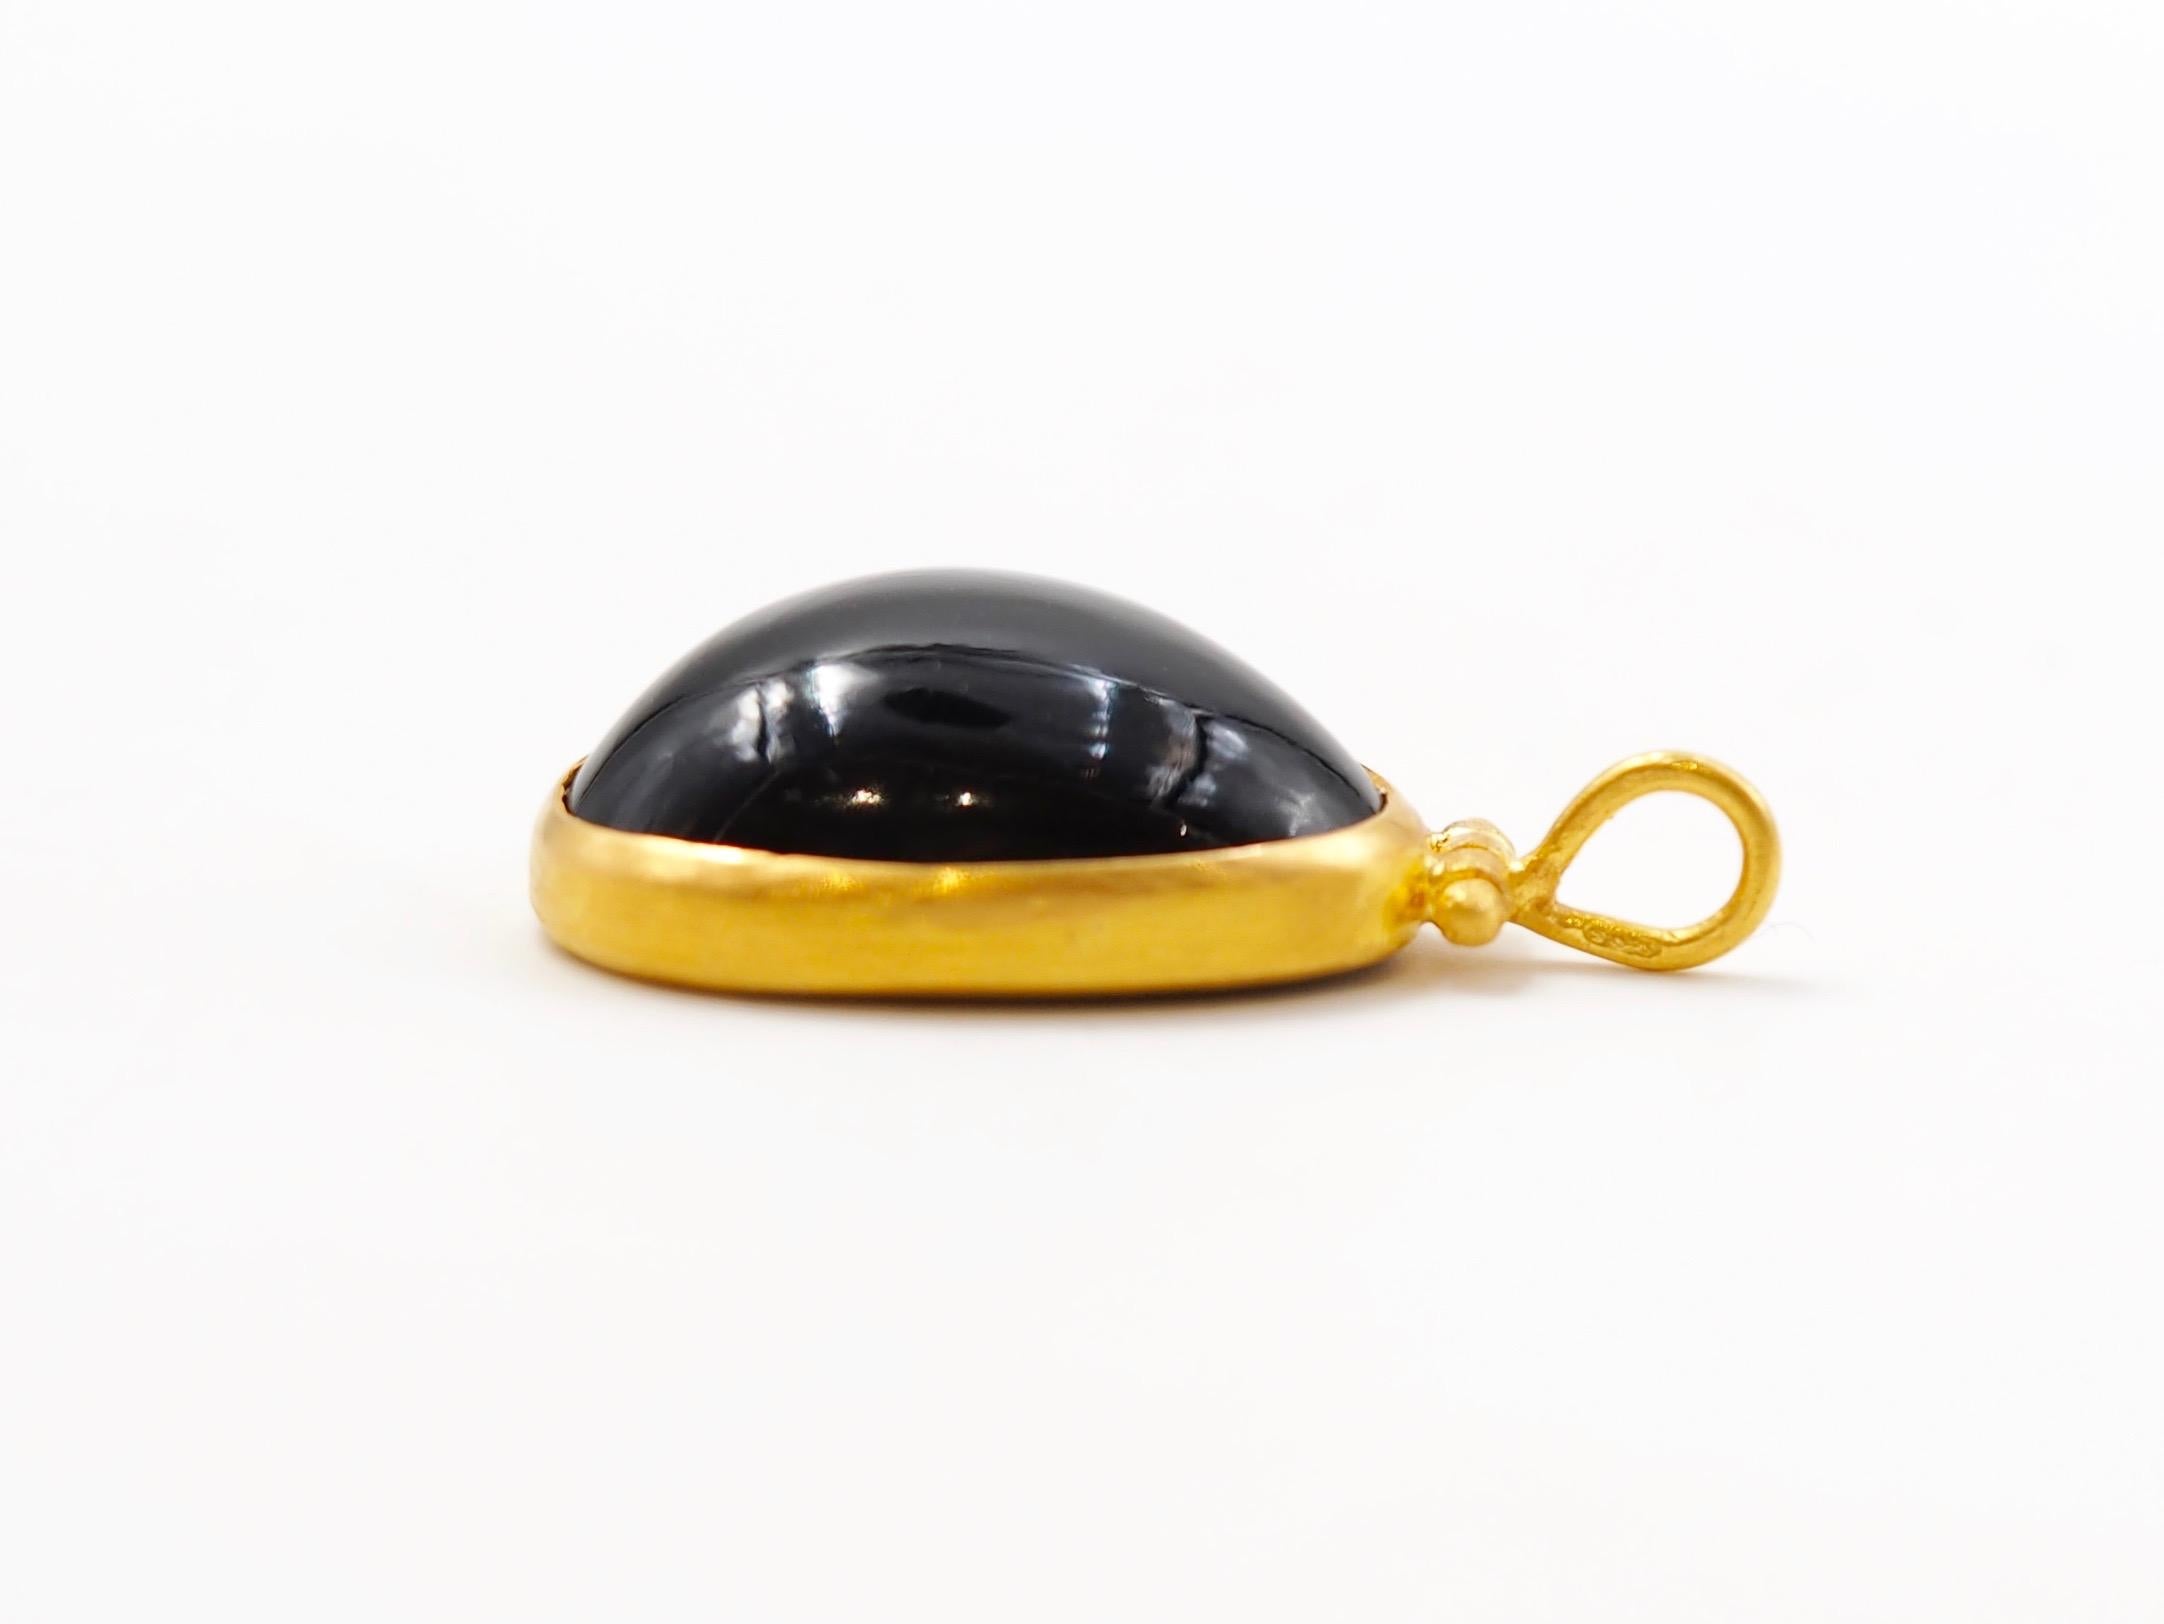 This pendant is composed of a large onyx cabochon of 18.4 cts. 
The top part is a swivel-hook with a large ring to allow any chain. 

This one-of-a-kind pendant is handmade with 22kt mat finish gold. After wearing the jewellery for sometime, the